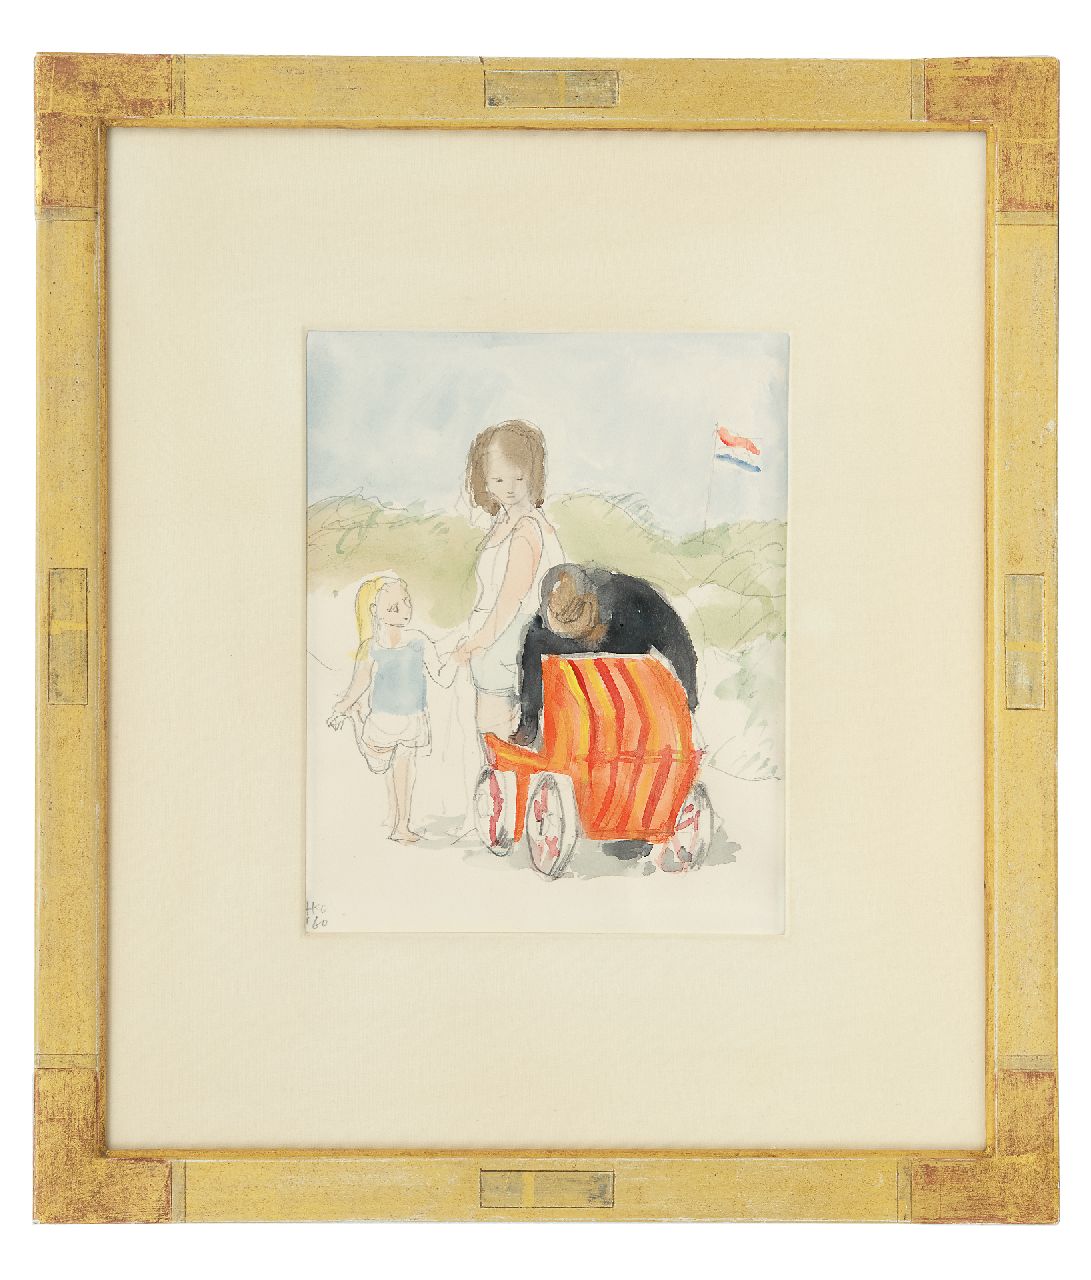 Kamerlingh Onnes H.H.  | 'Harm' Henrick Kamerlingh Onnes | Watercolours and drawings offered for sale | Family in the dunes on Terschelling, pencil and watercolour on paper 18.8 x 16.2 cm, signed l.l. with monogram and painted '60